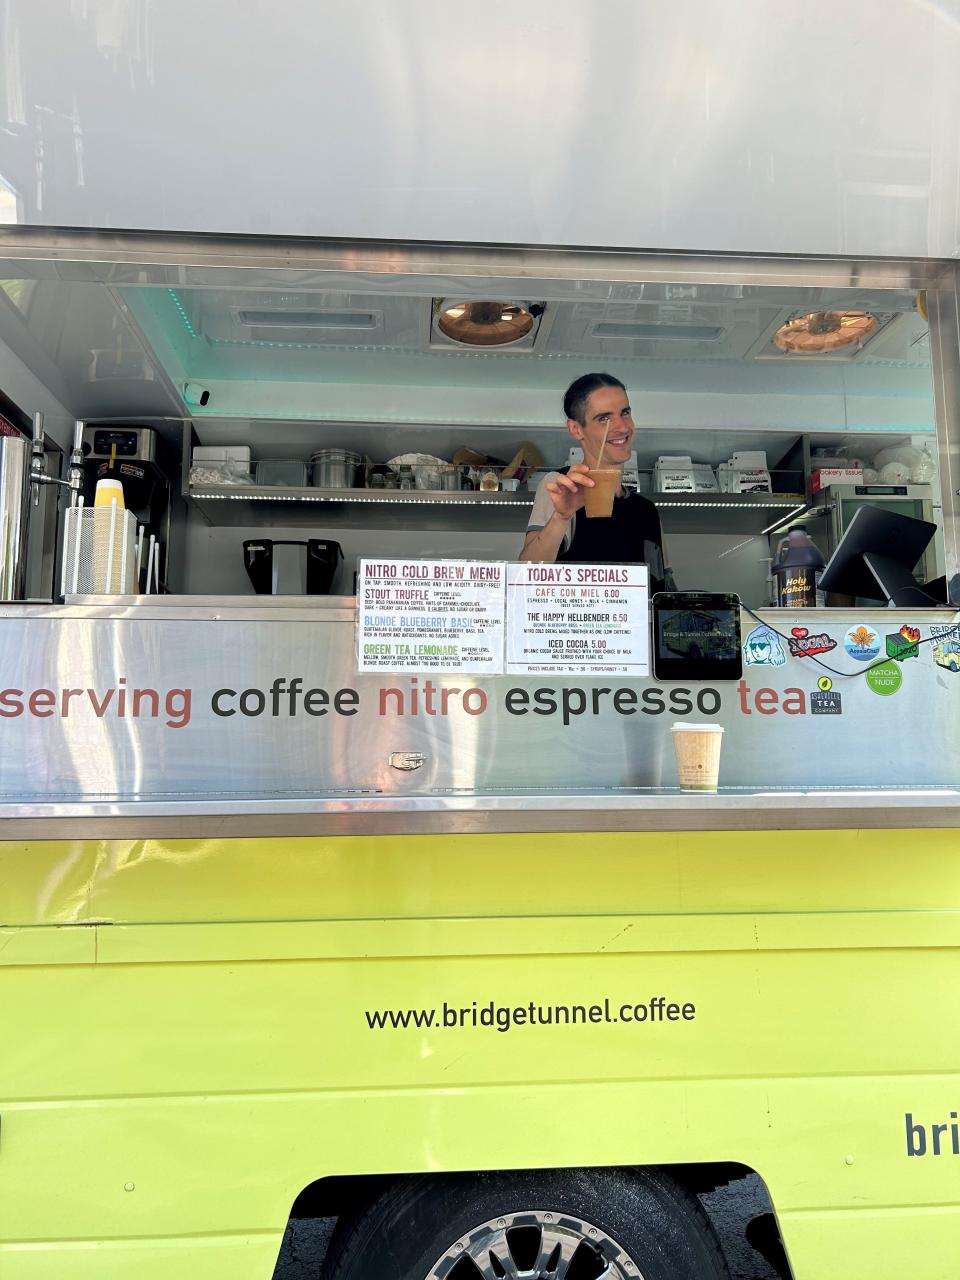 Bridge And Tunnel Coffee Co. at The Village Park Food Truck in Fletcher.